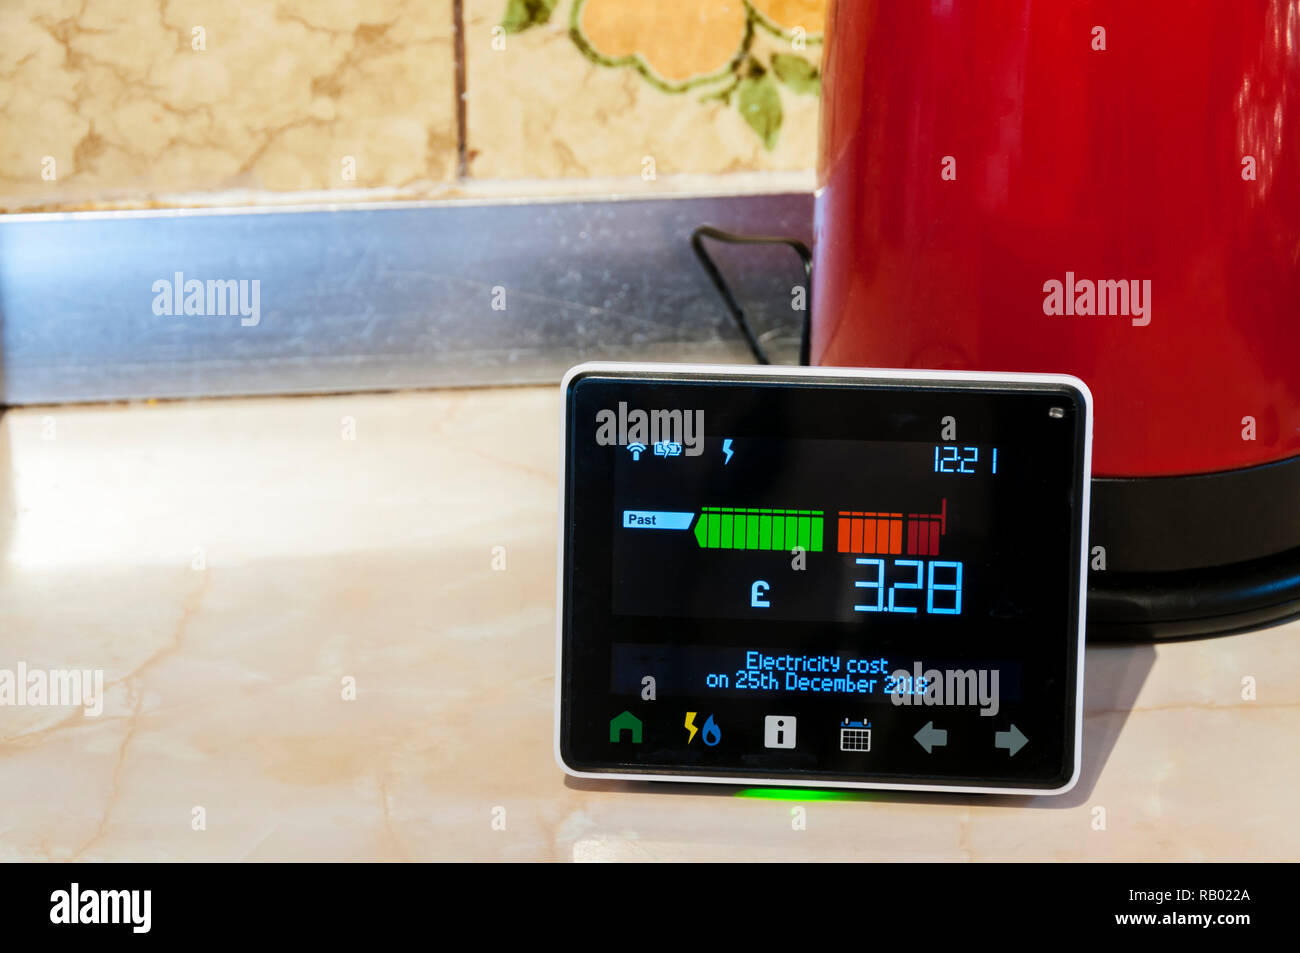 A Chameleon Technology Smart Meter provided by EDF Energy in a domestic kitchen.  Shows cost of energy consumed during day. Stock Photo